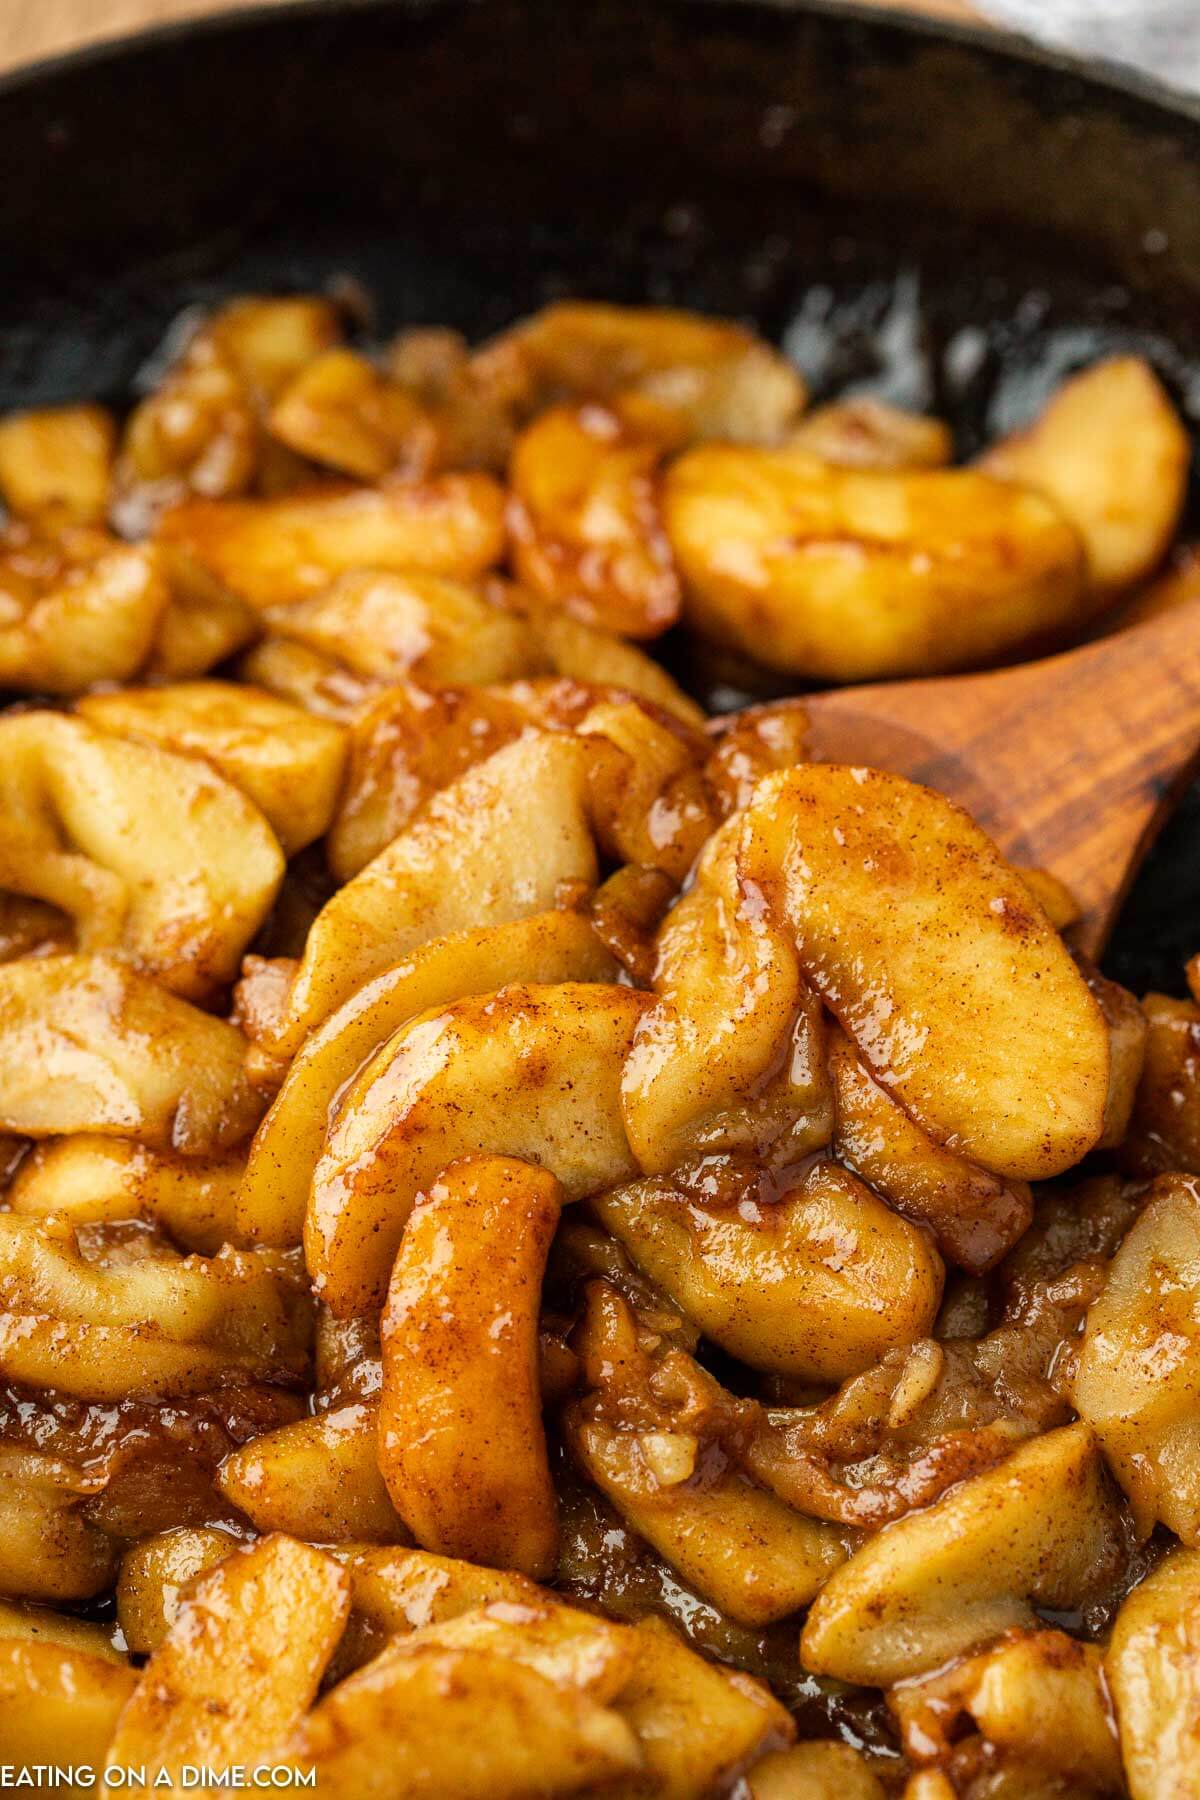 Fried Apples in a dish with a wooden spoon